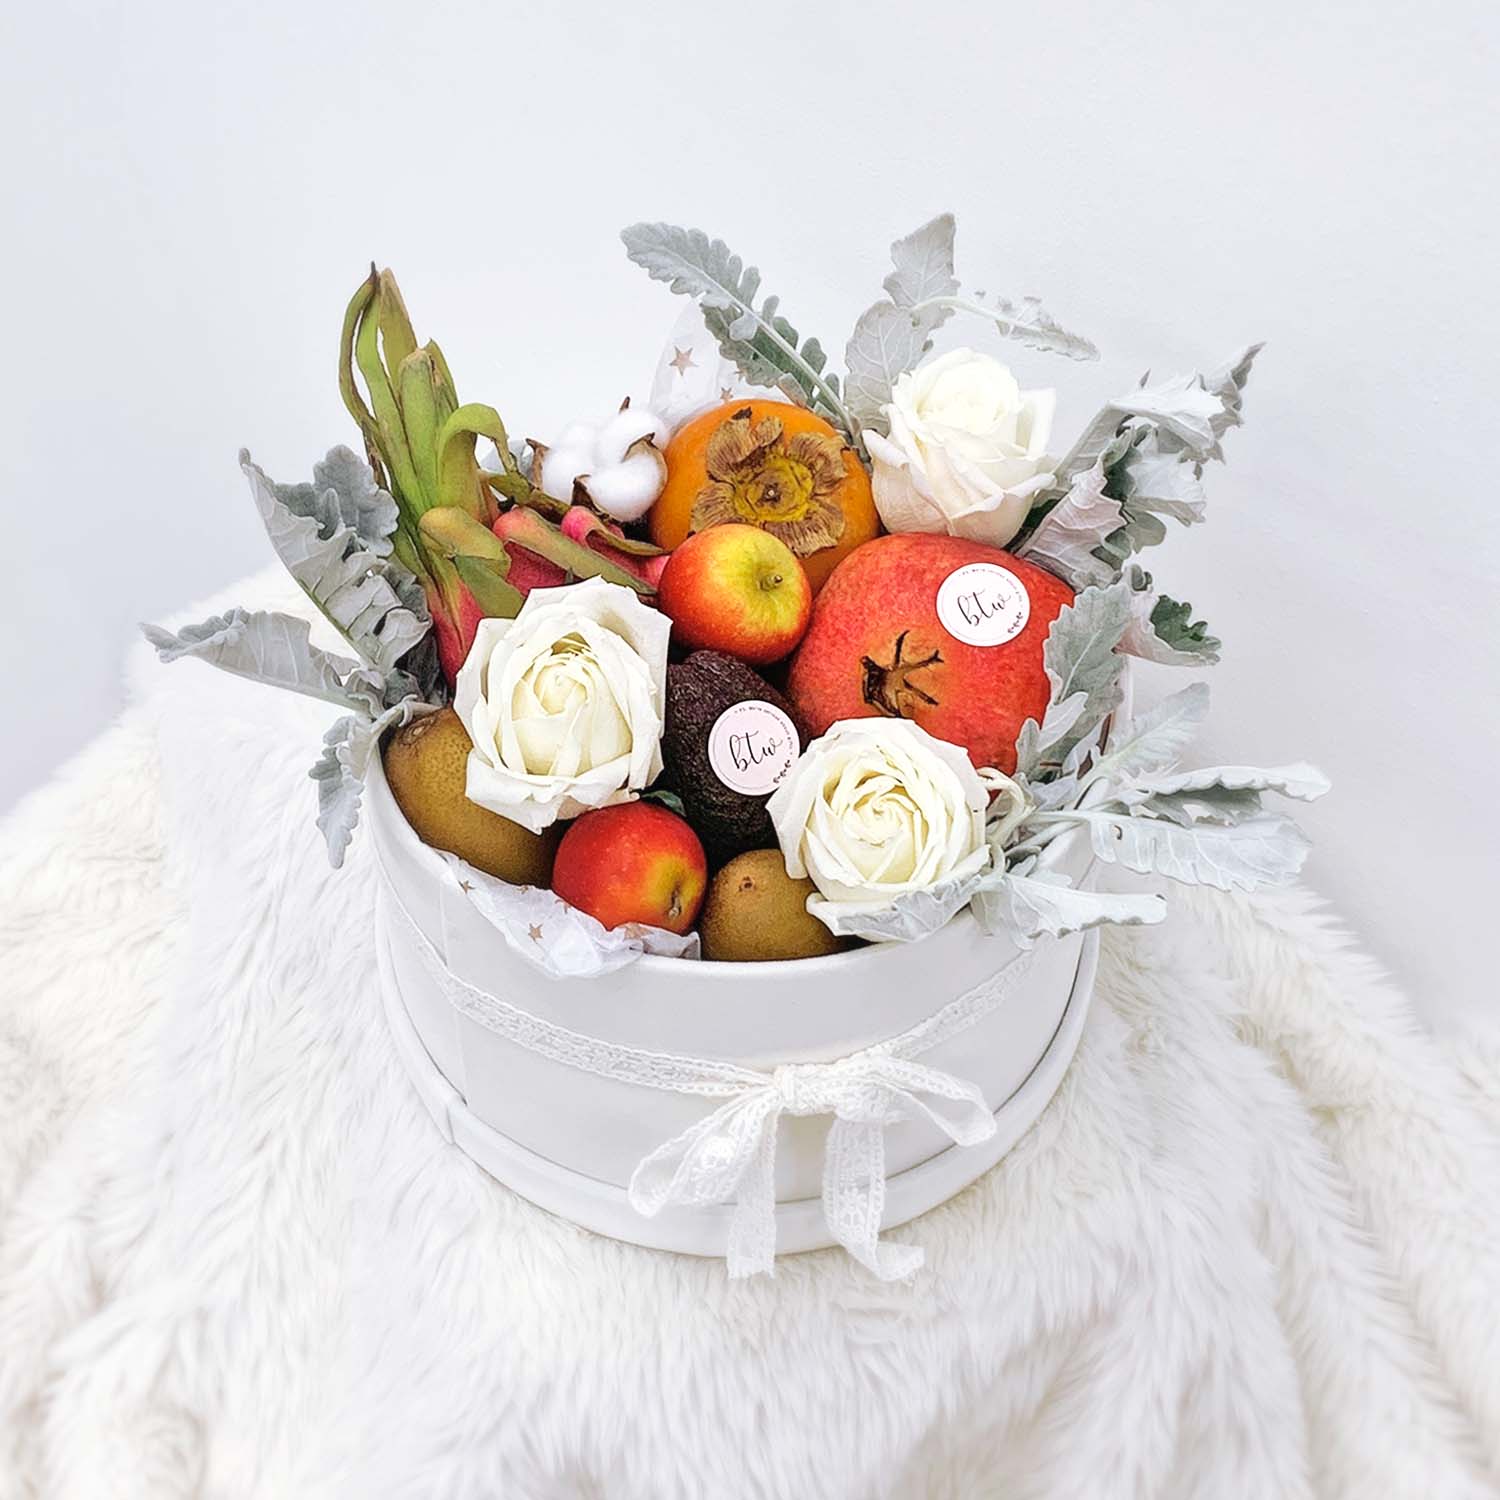 A fruit basket that is expressive, elegant and reminiscent of clear, crisp midnight dew. Send this healthy and quality floral gift to someone special today!